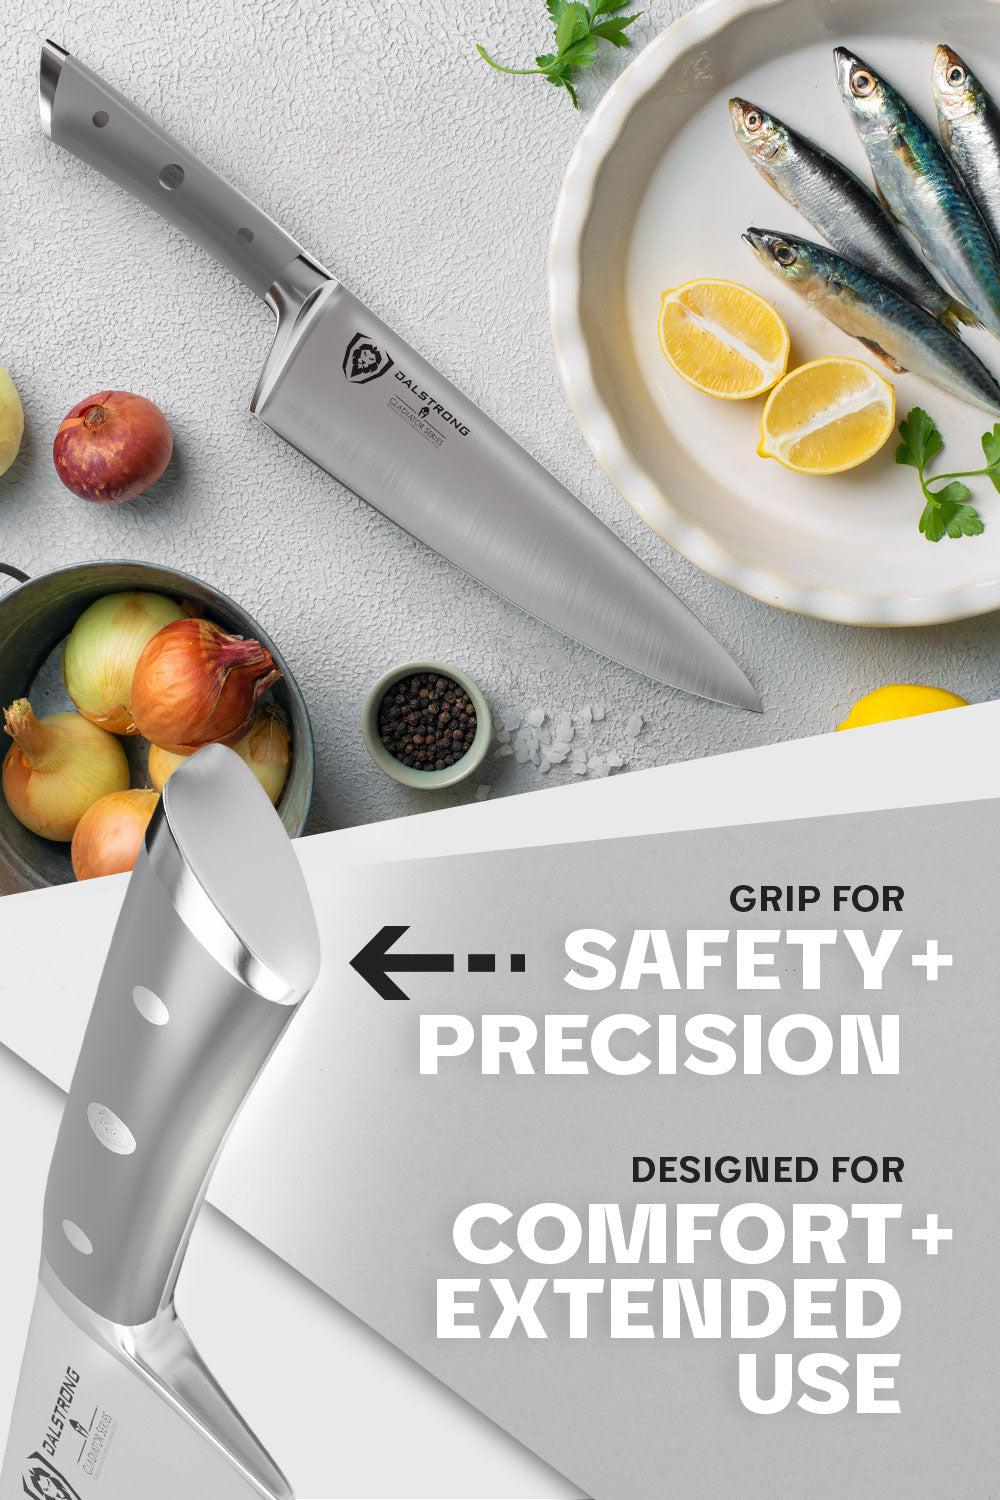 Dalstrong gladiator series 8 inch chef knife featuring it's grip and comfortable handle.